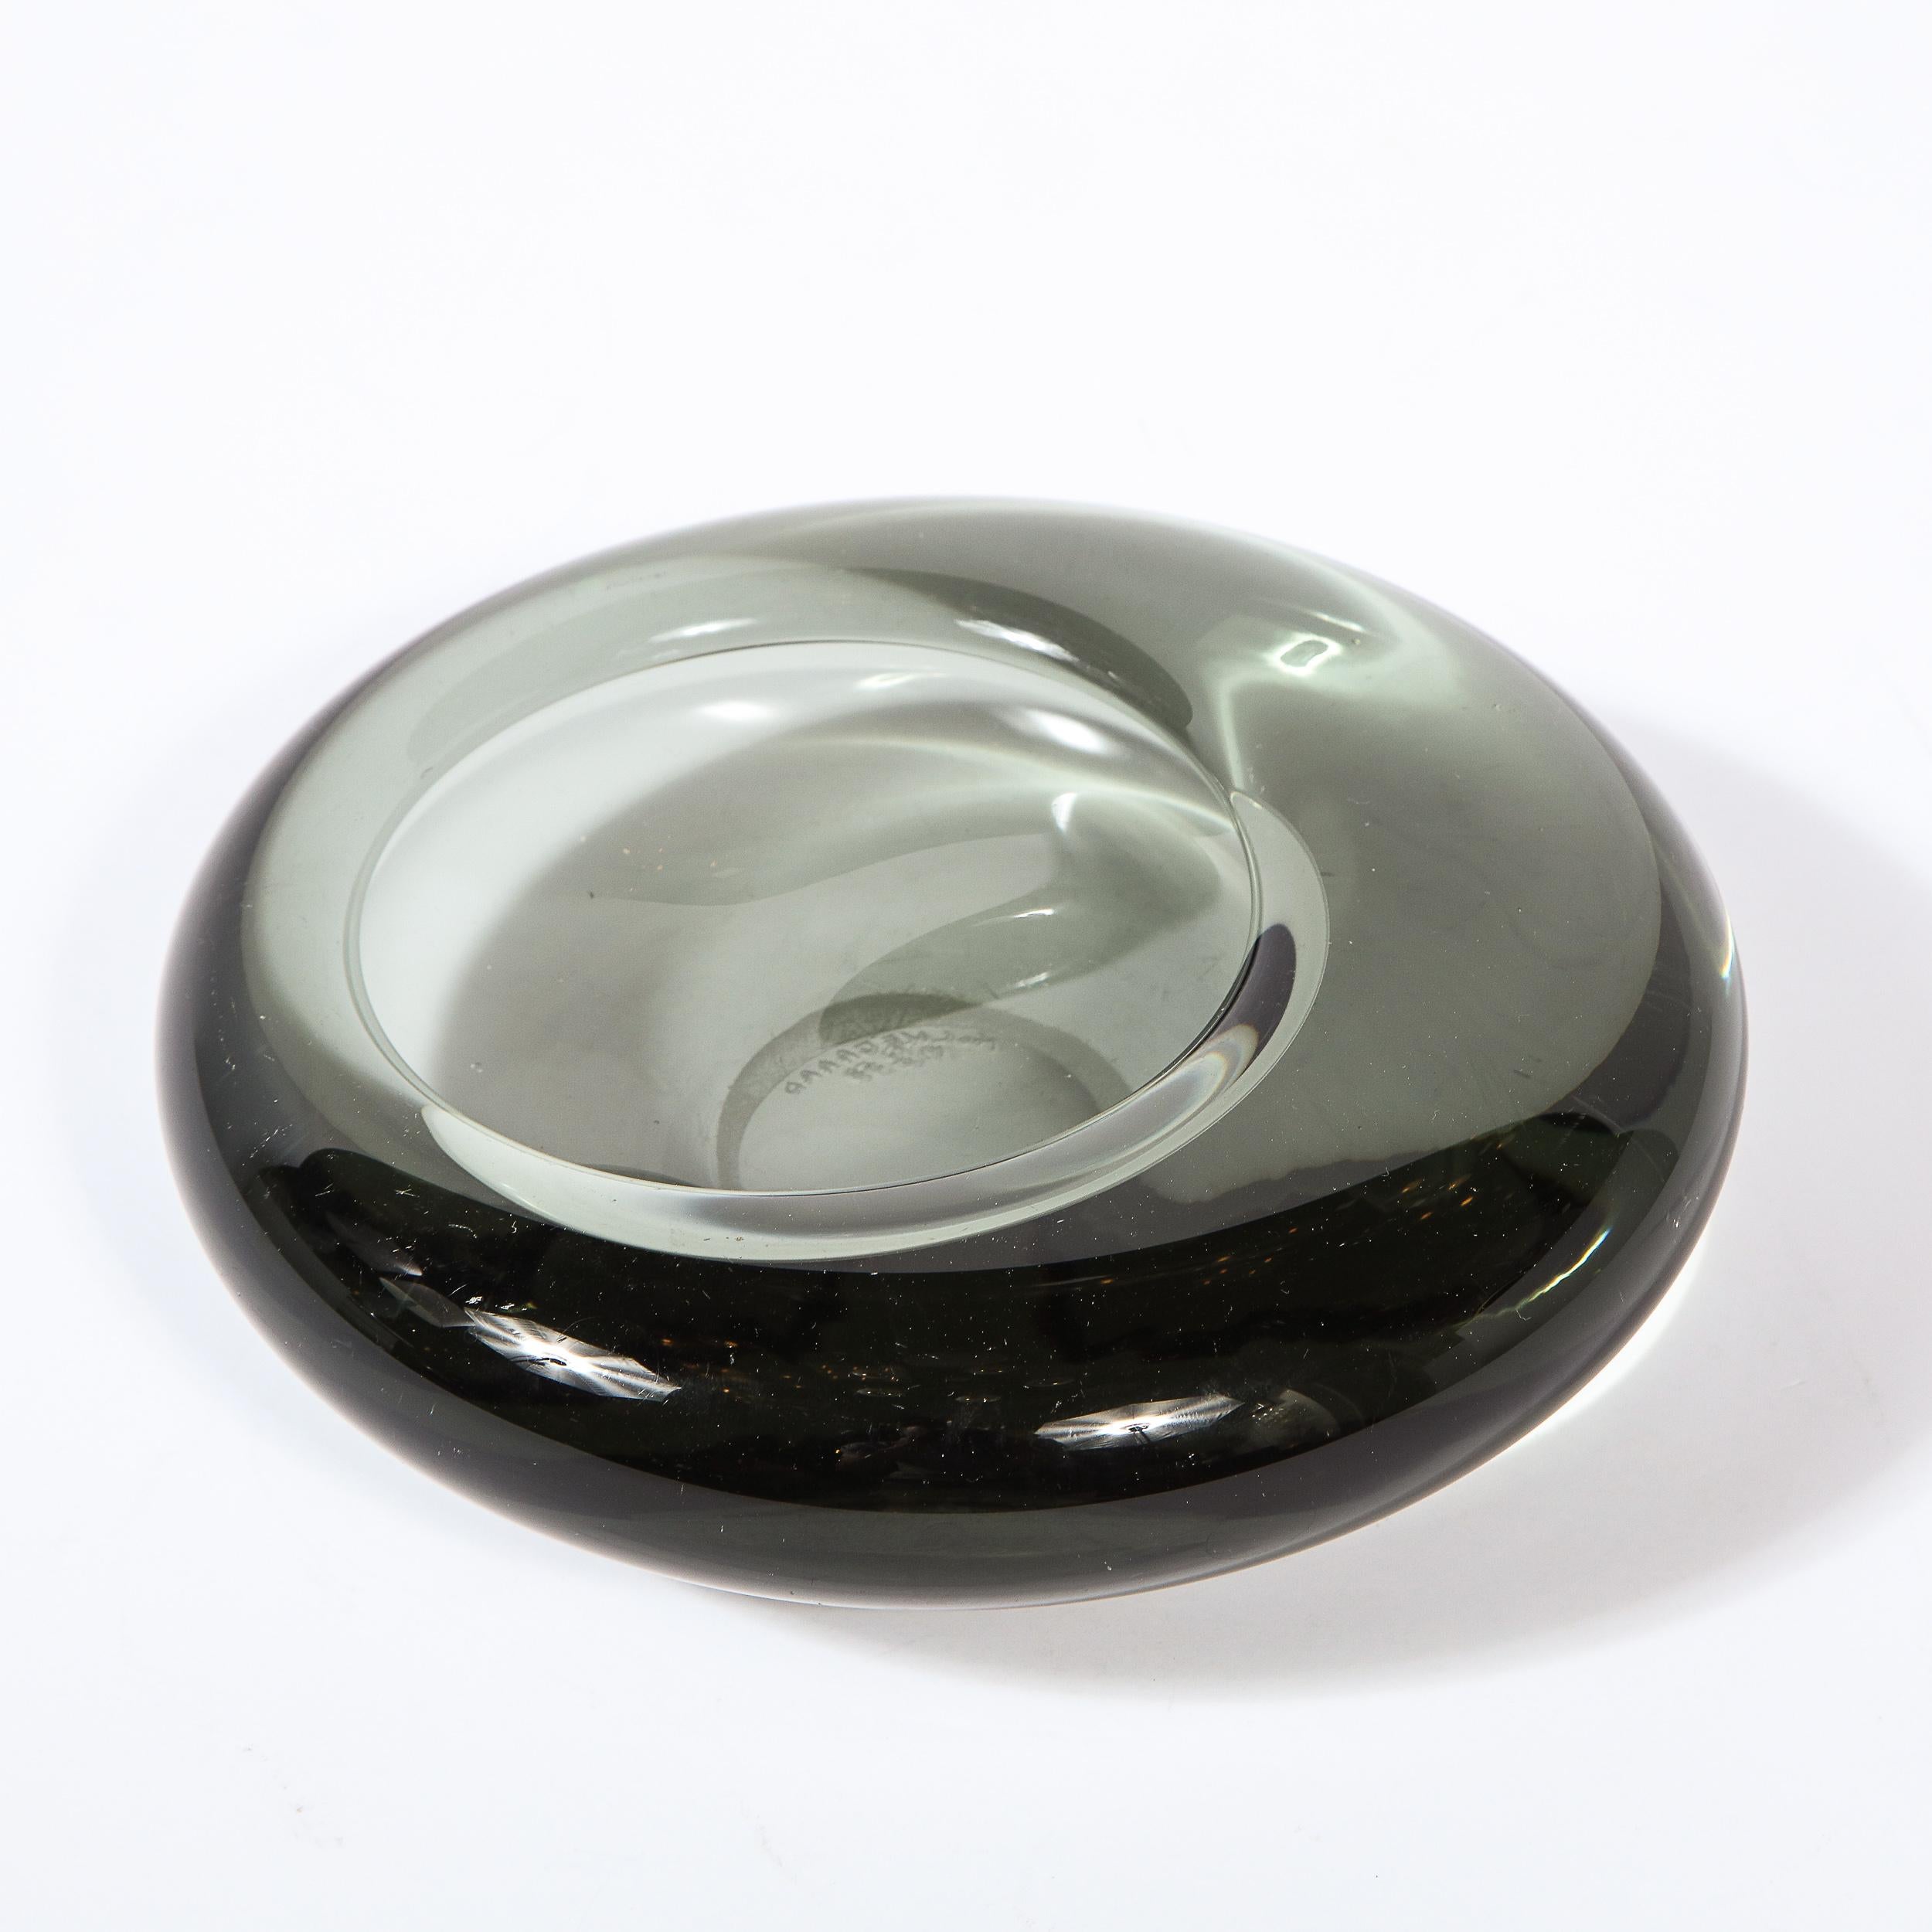 Mid-20th Century Swedish Mid-Century Modern Handblown Smoked Glass Dish Signed by Holmegaard For Sale